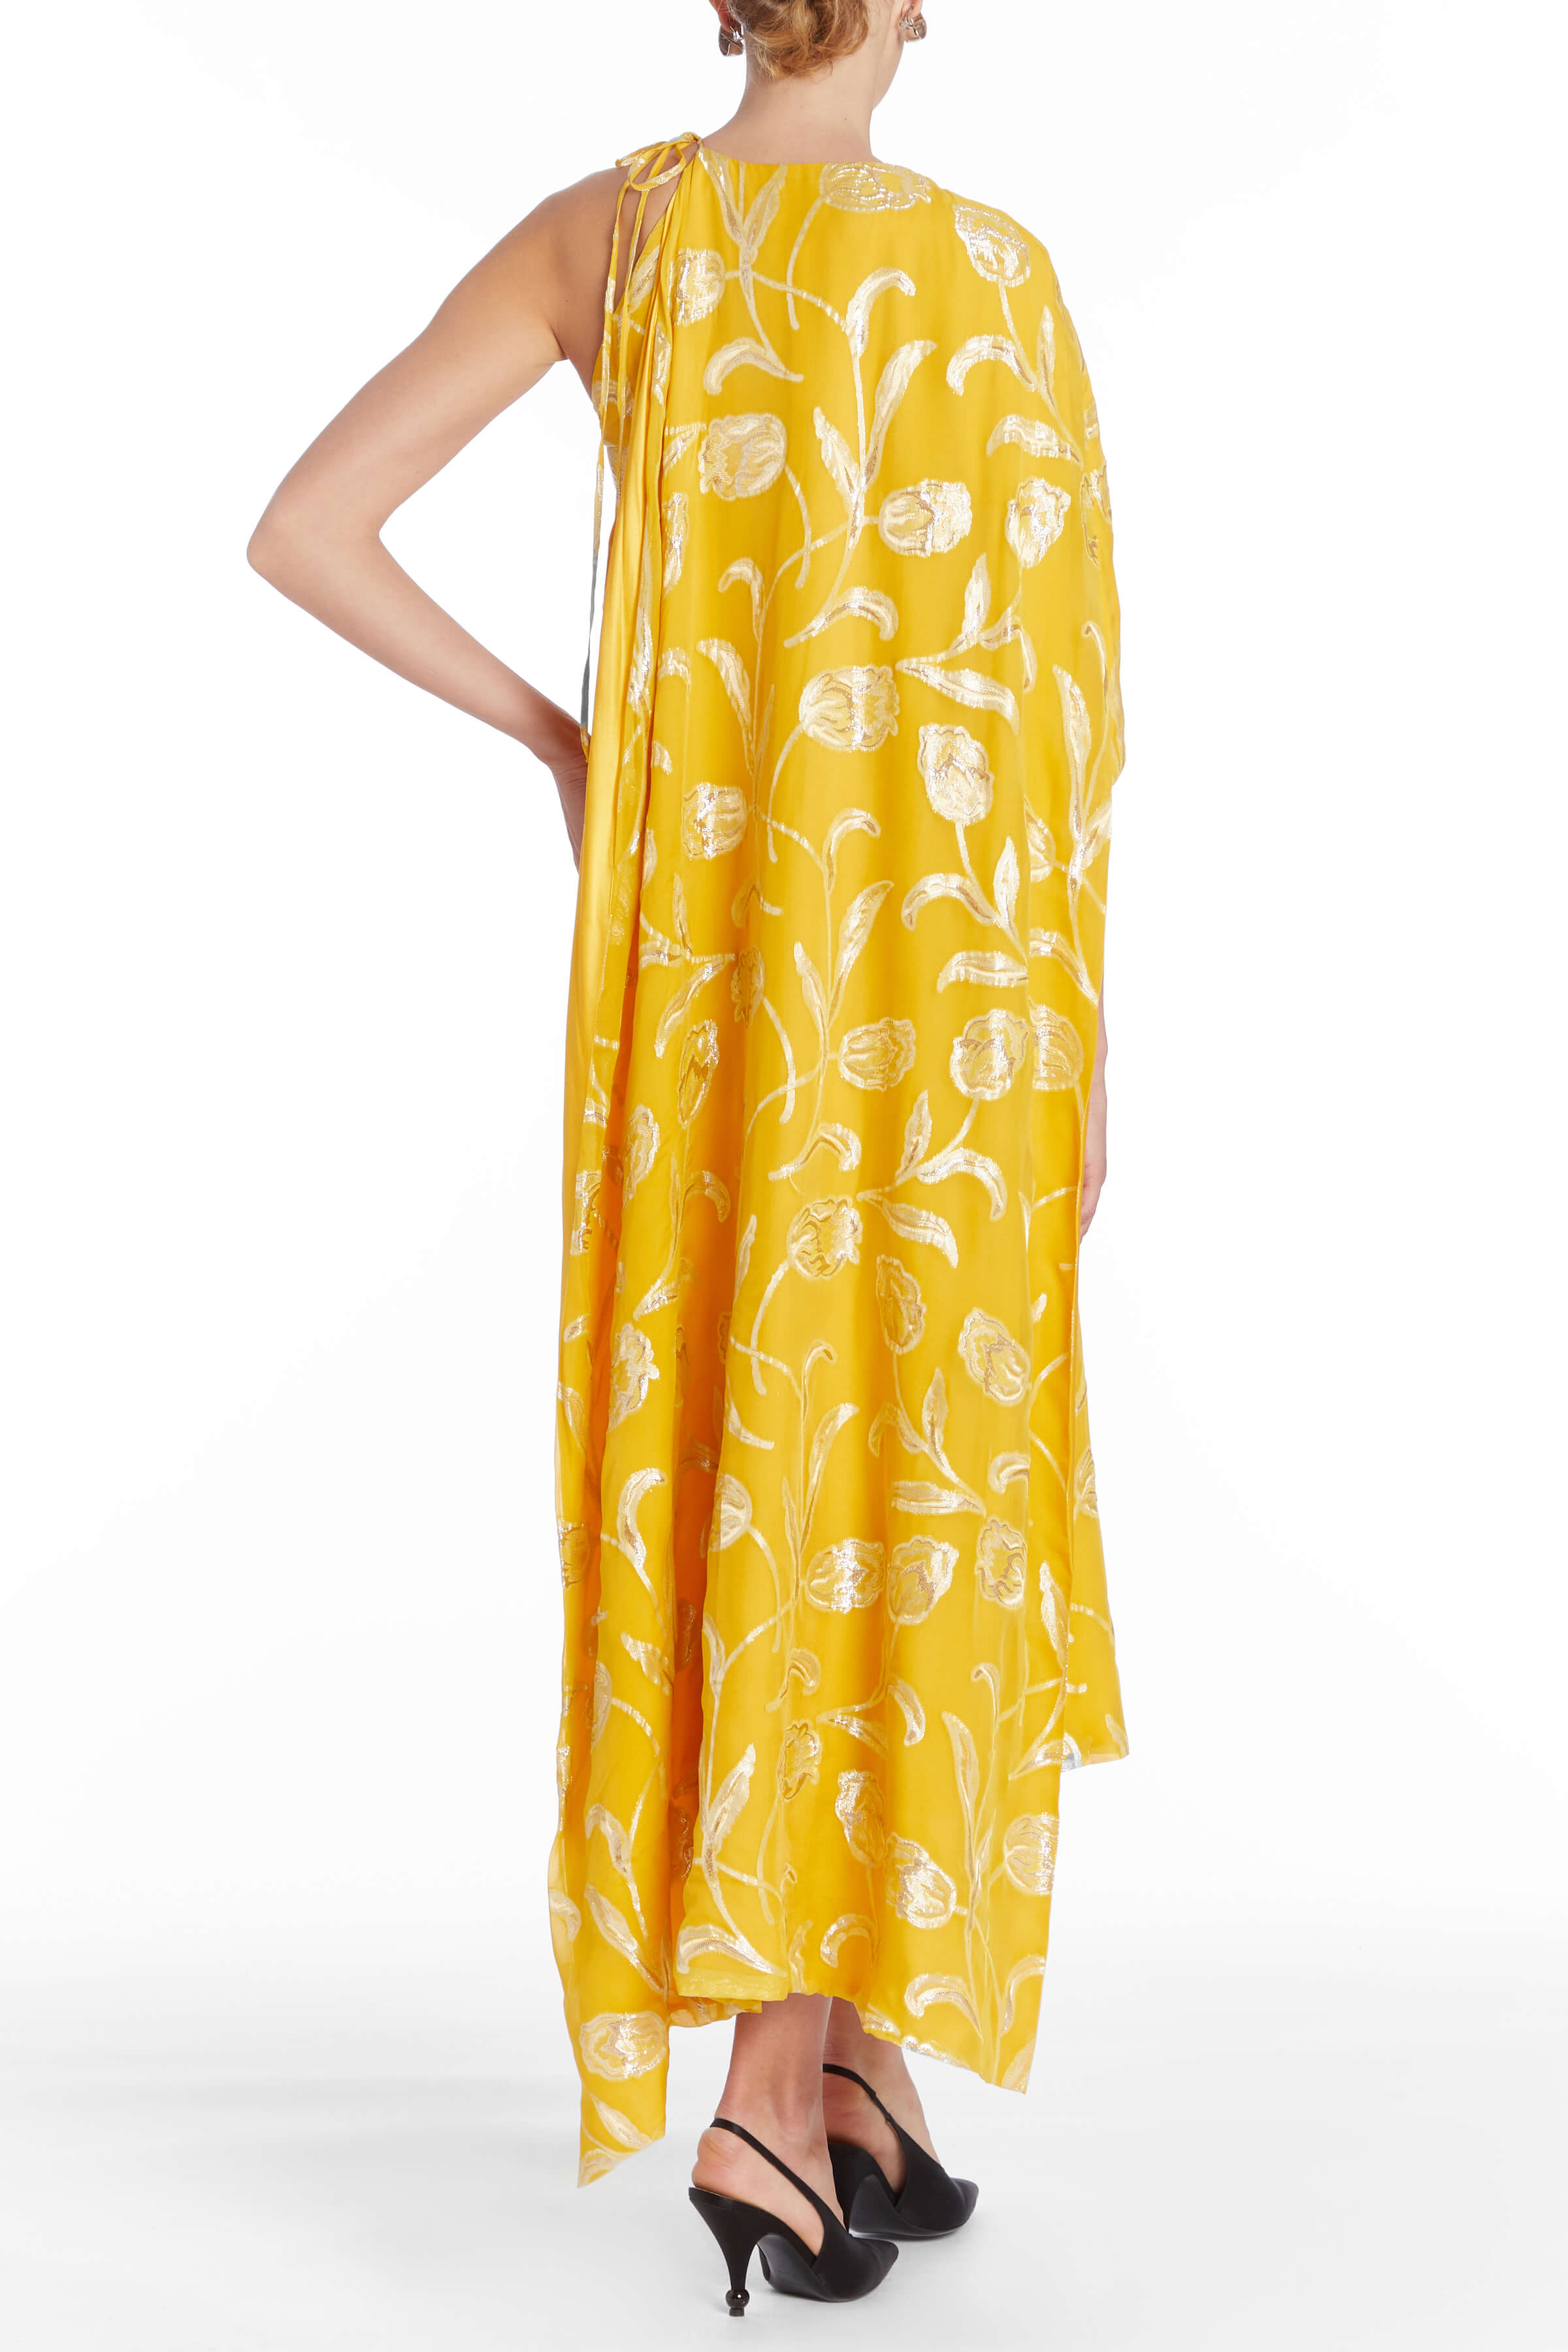 Kennedy Yellow Floral Cape Dress